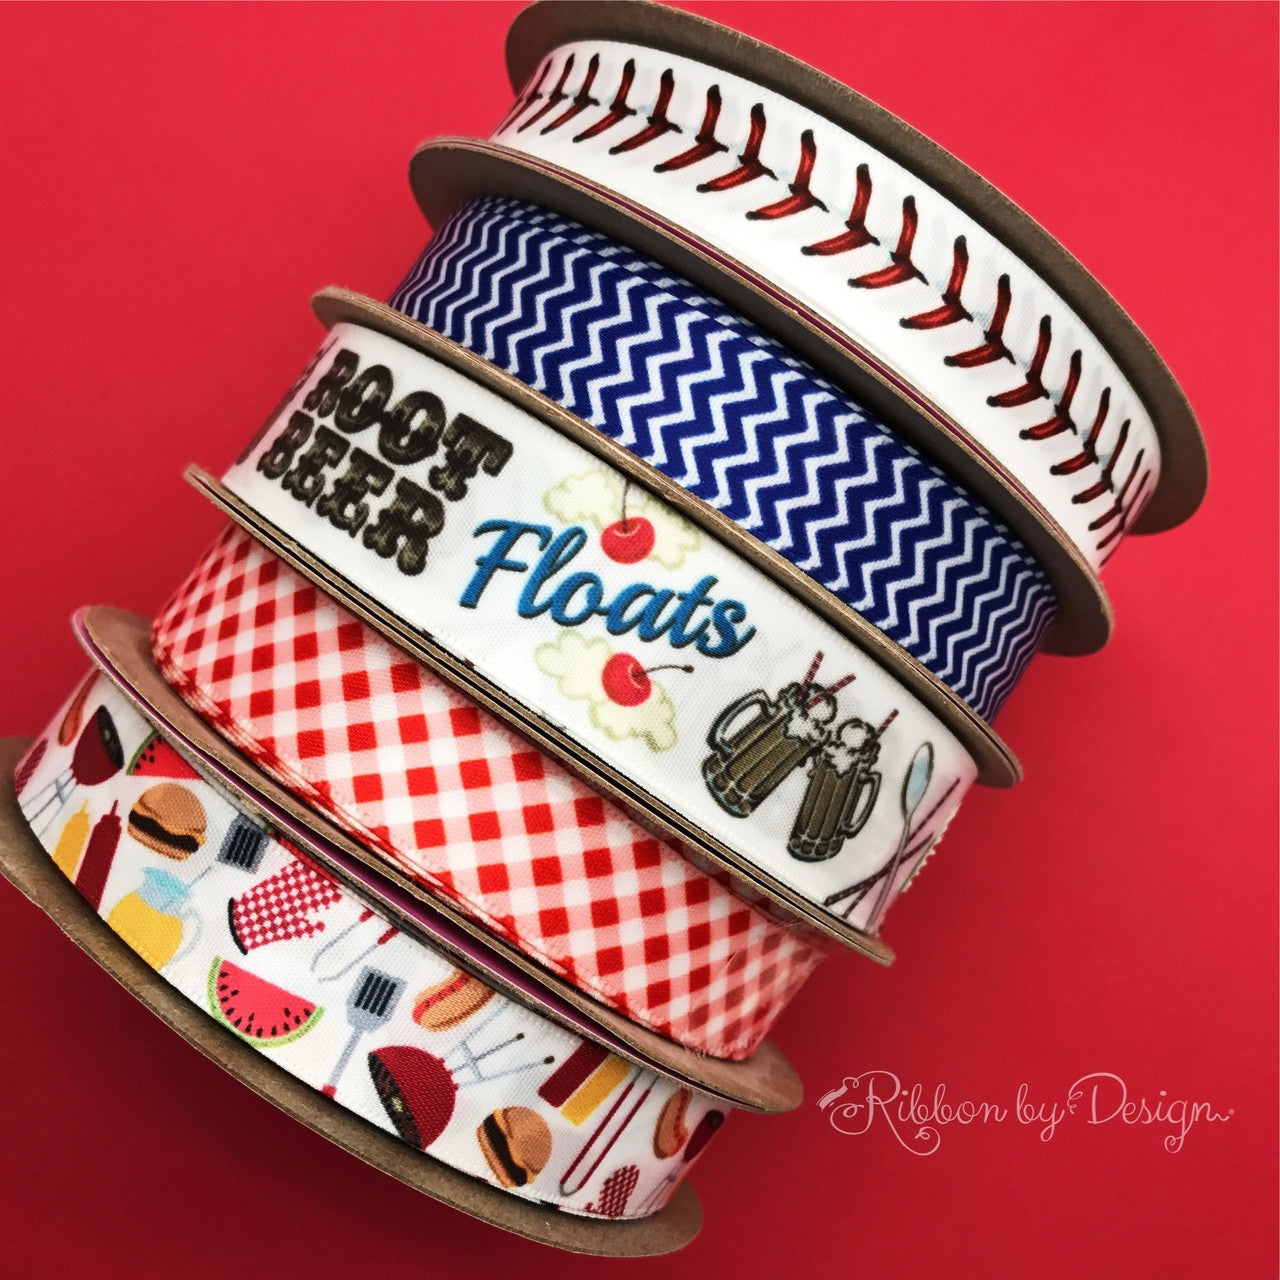 Root Beer floats and a fabulous Summer time treat! Be sure to add this fun ribbon to your Summer collection for Father's Day, parties and barbecues!